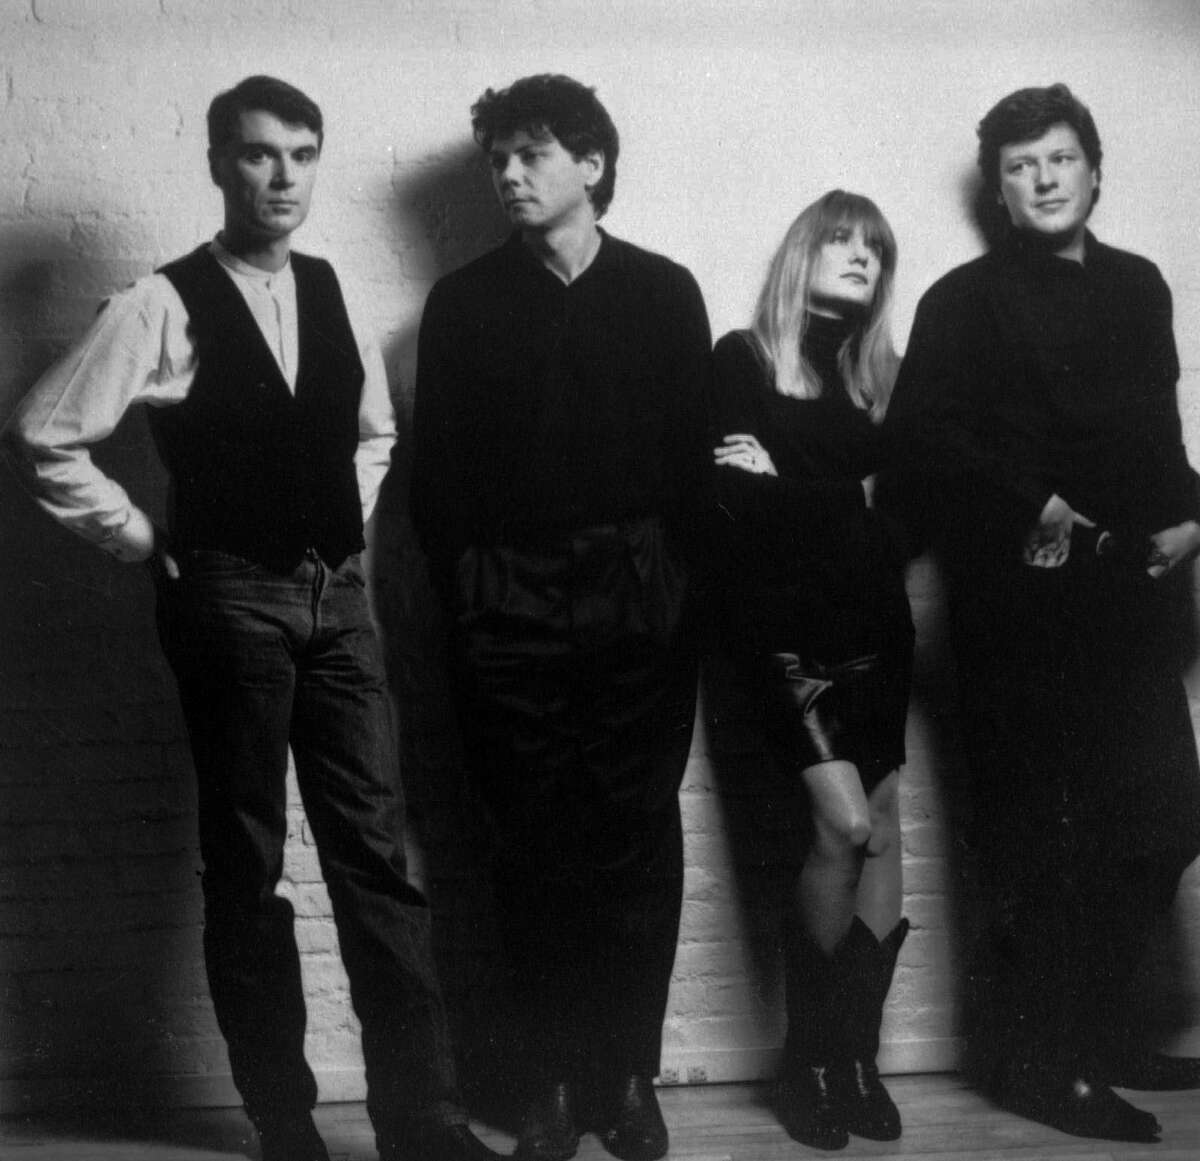 FILE--The Talking Heads, shown in this 1988 file photo, are from left, David Byrne, Jerry Harrison, Tina Weymouth and Chris Frantz.